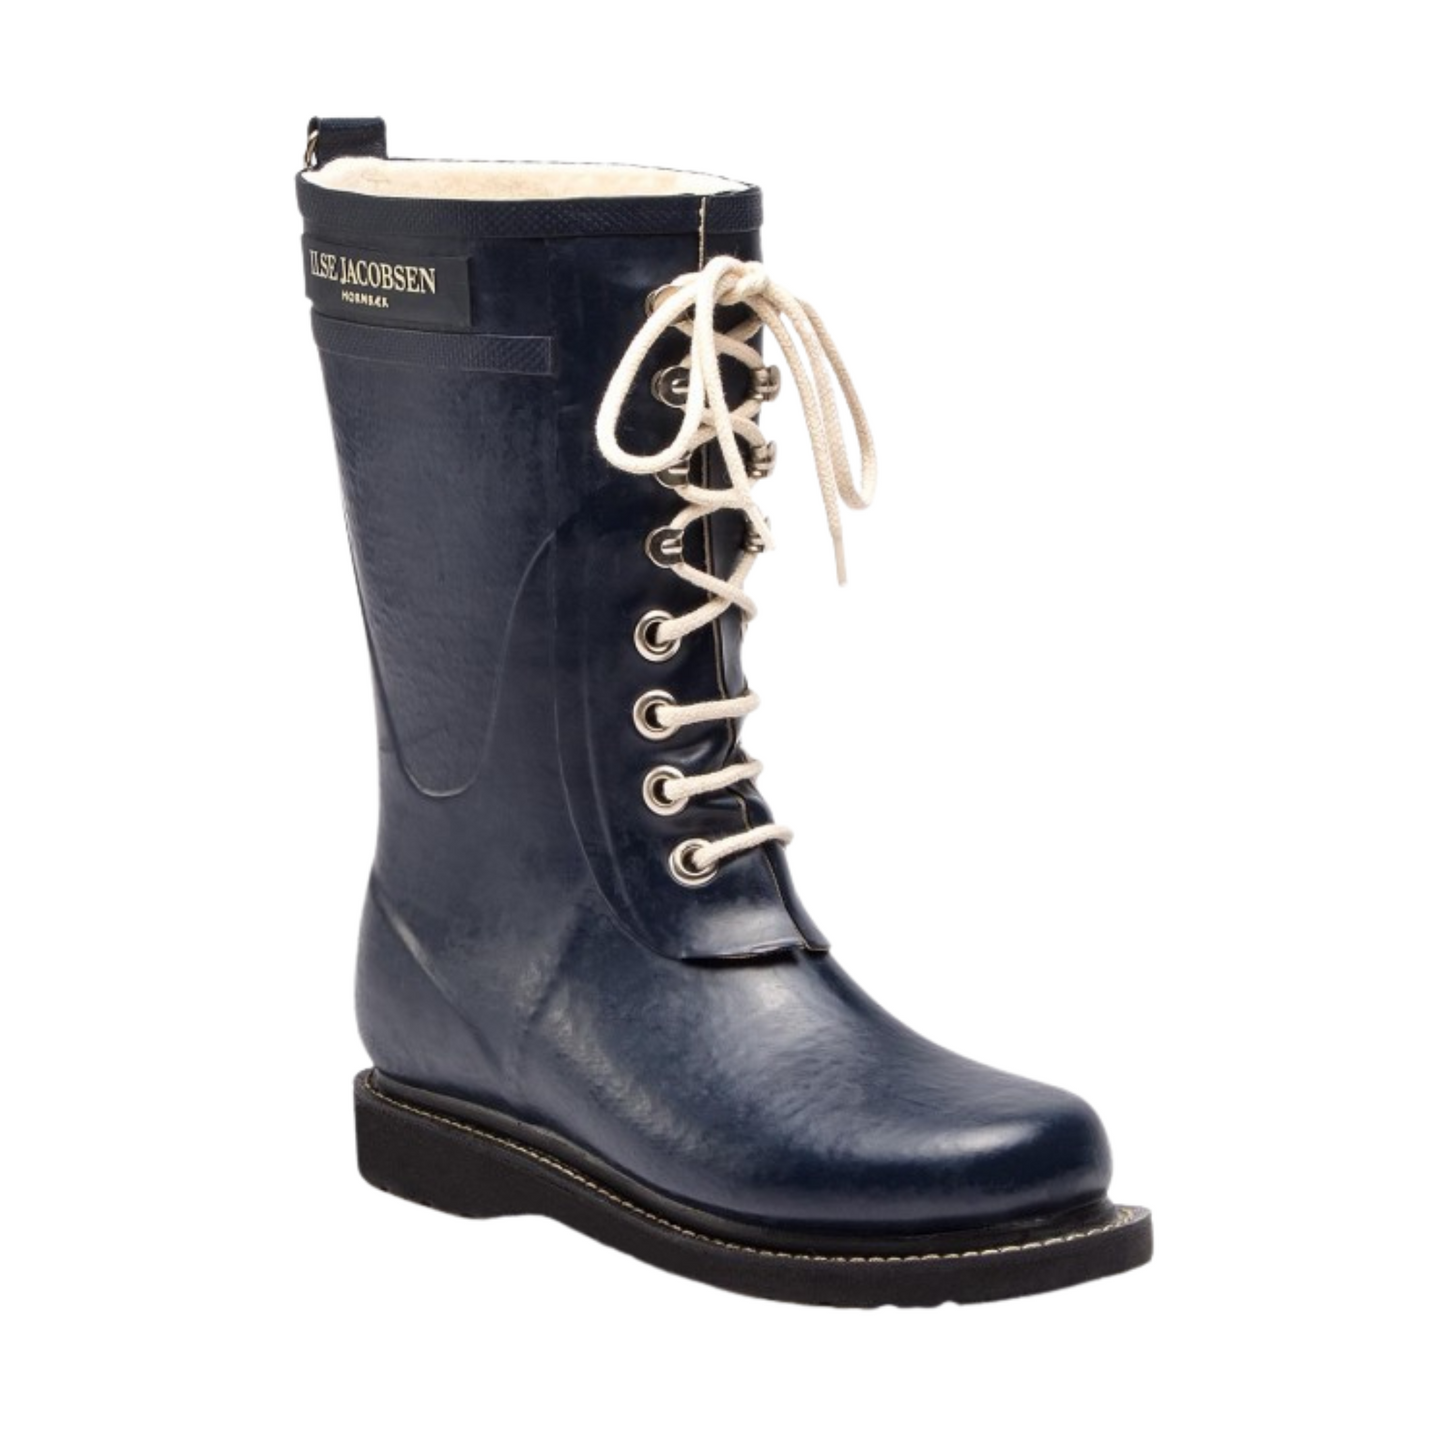 A right angle view of a navy rubber boot with white laces.